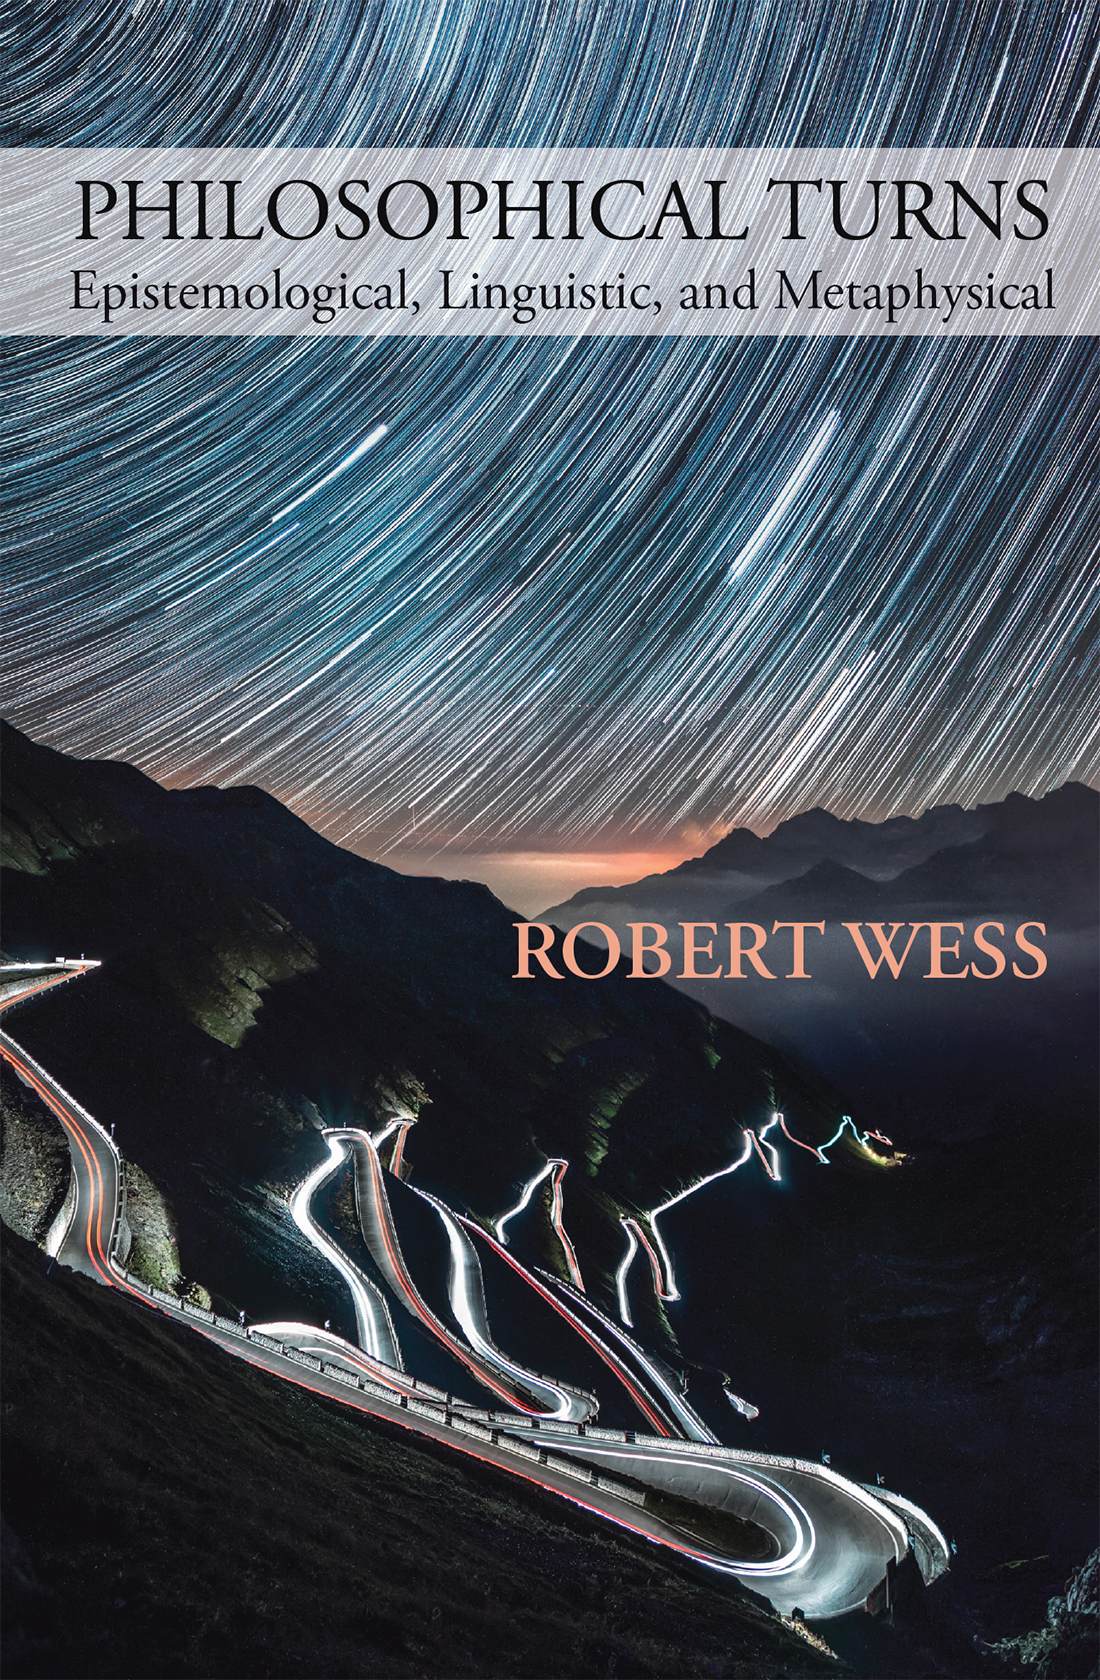 Cover of Philosophical Turns by Robert Wess